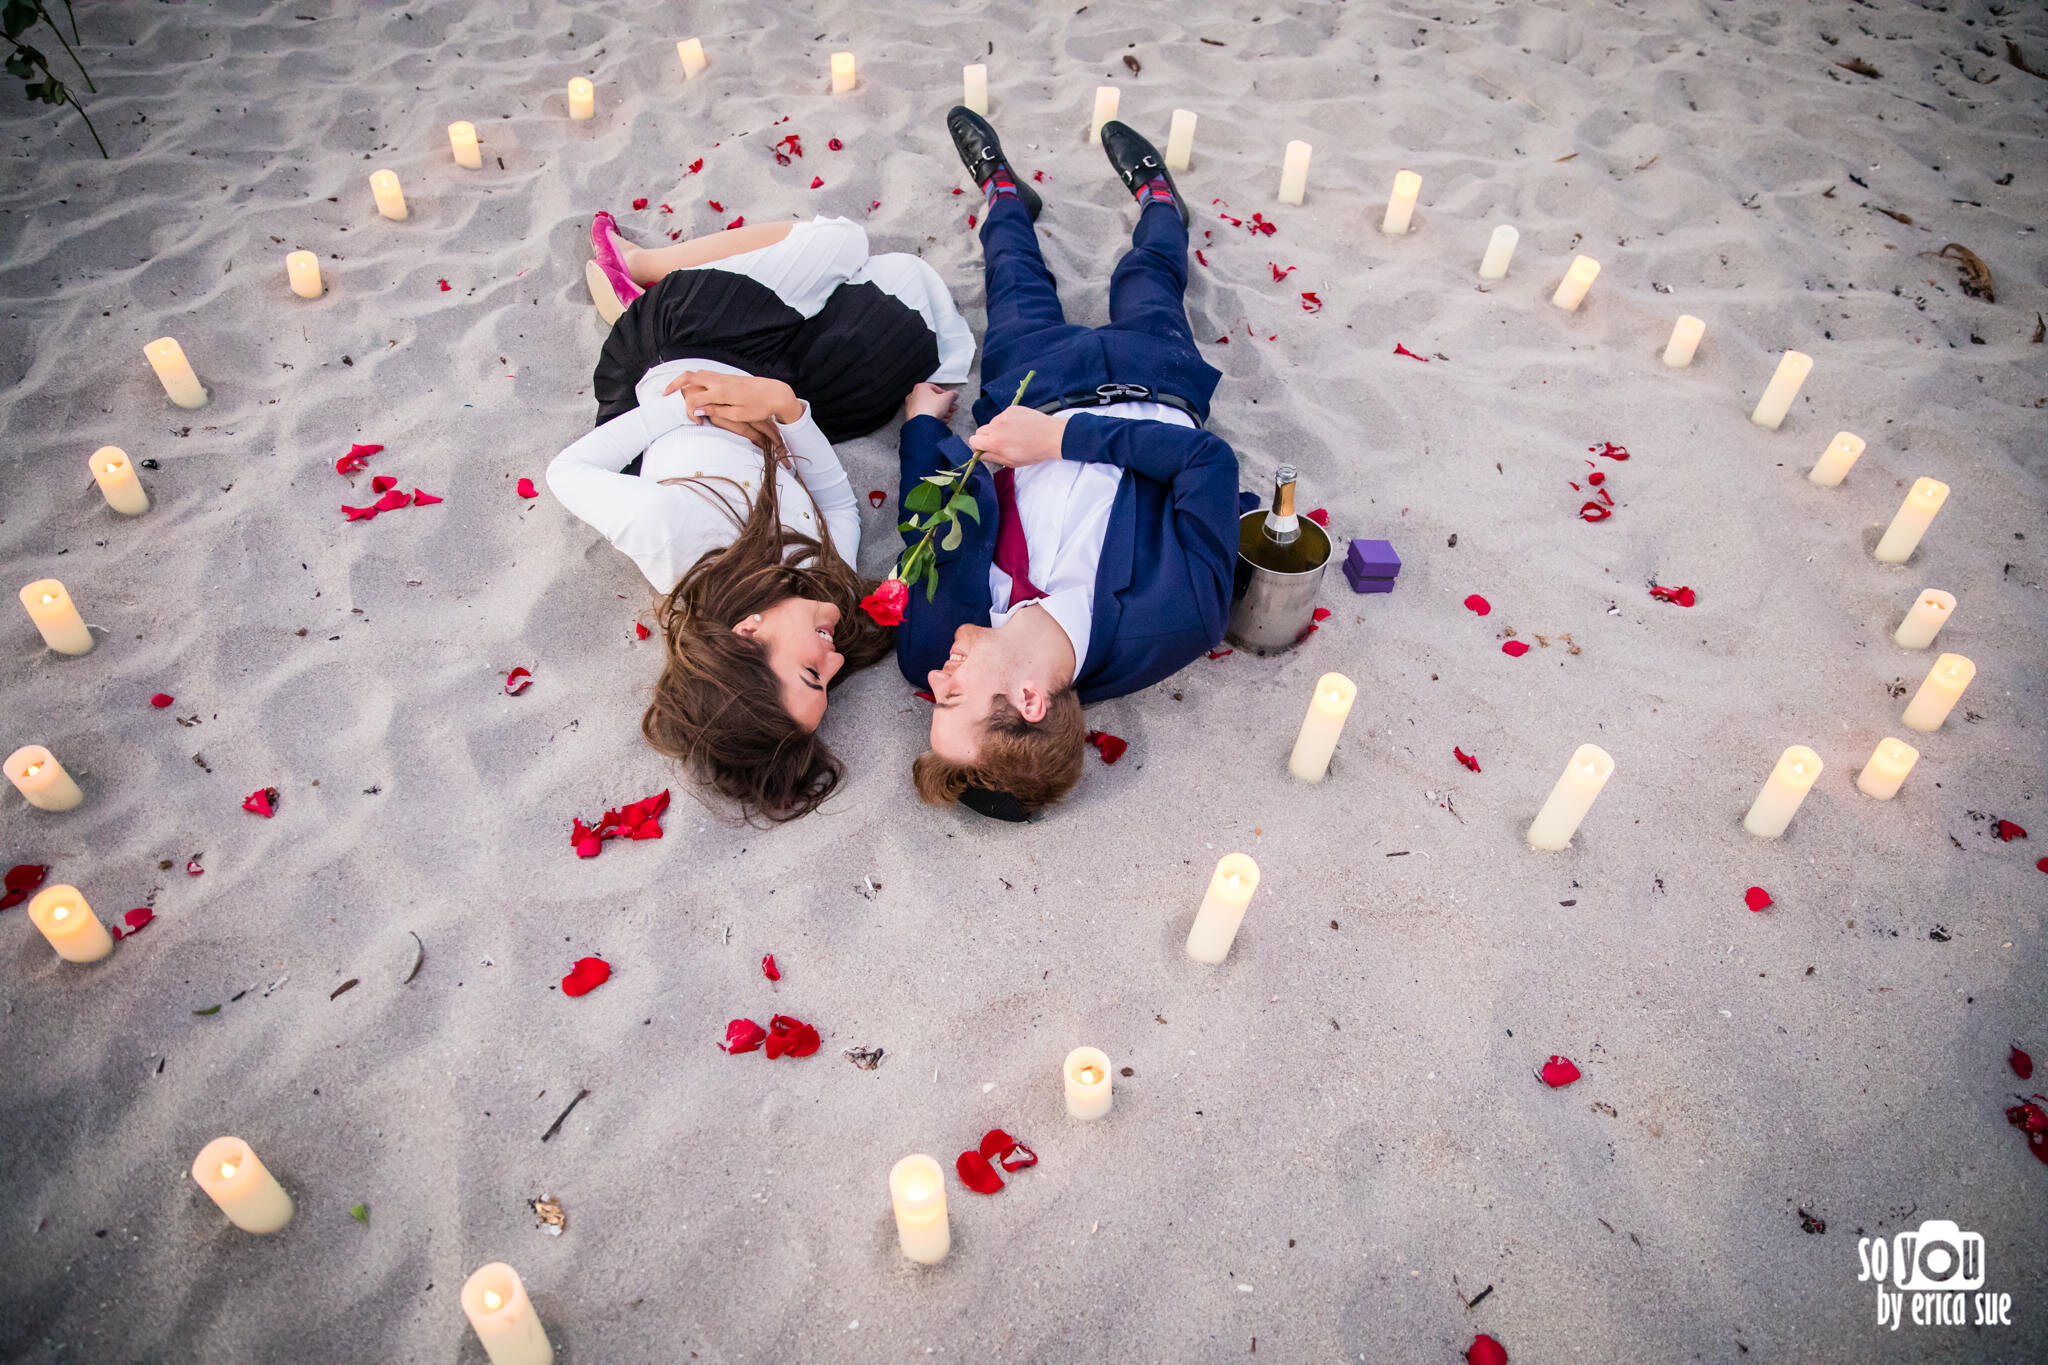 so-you-by-erica-sue-hollywood-fl-photographer-beach-engagement-flowers-candles-5160.jpg